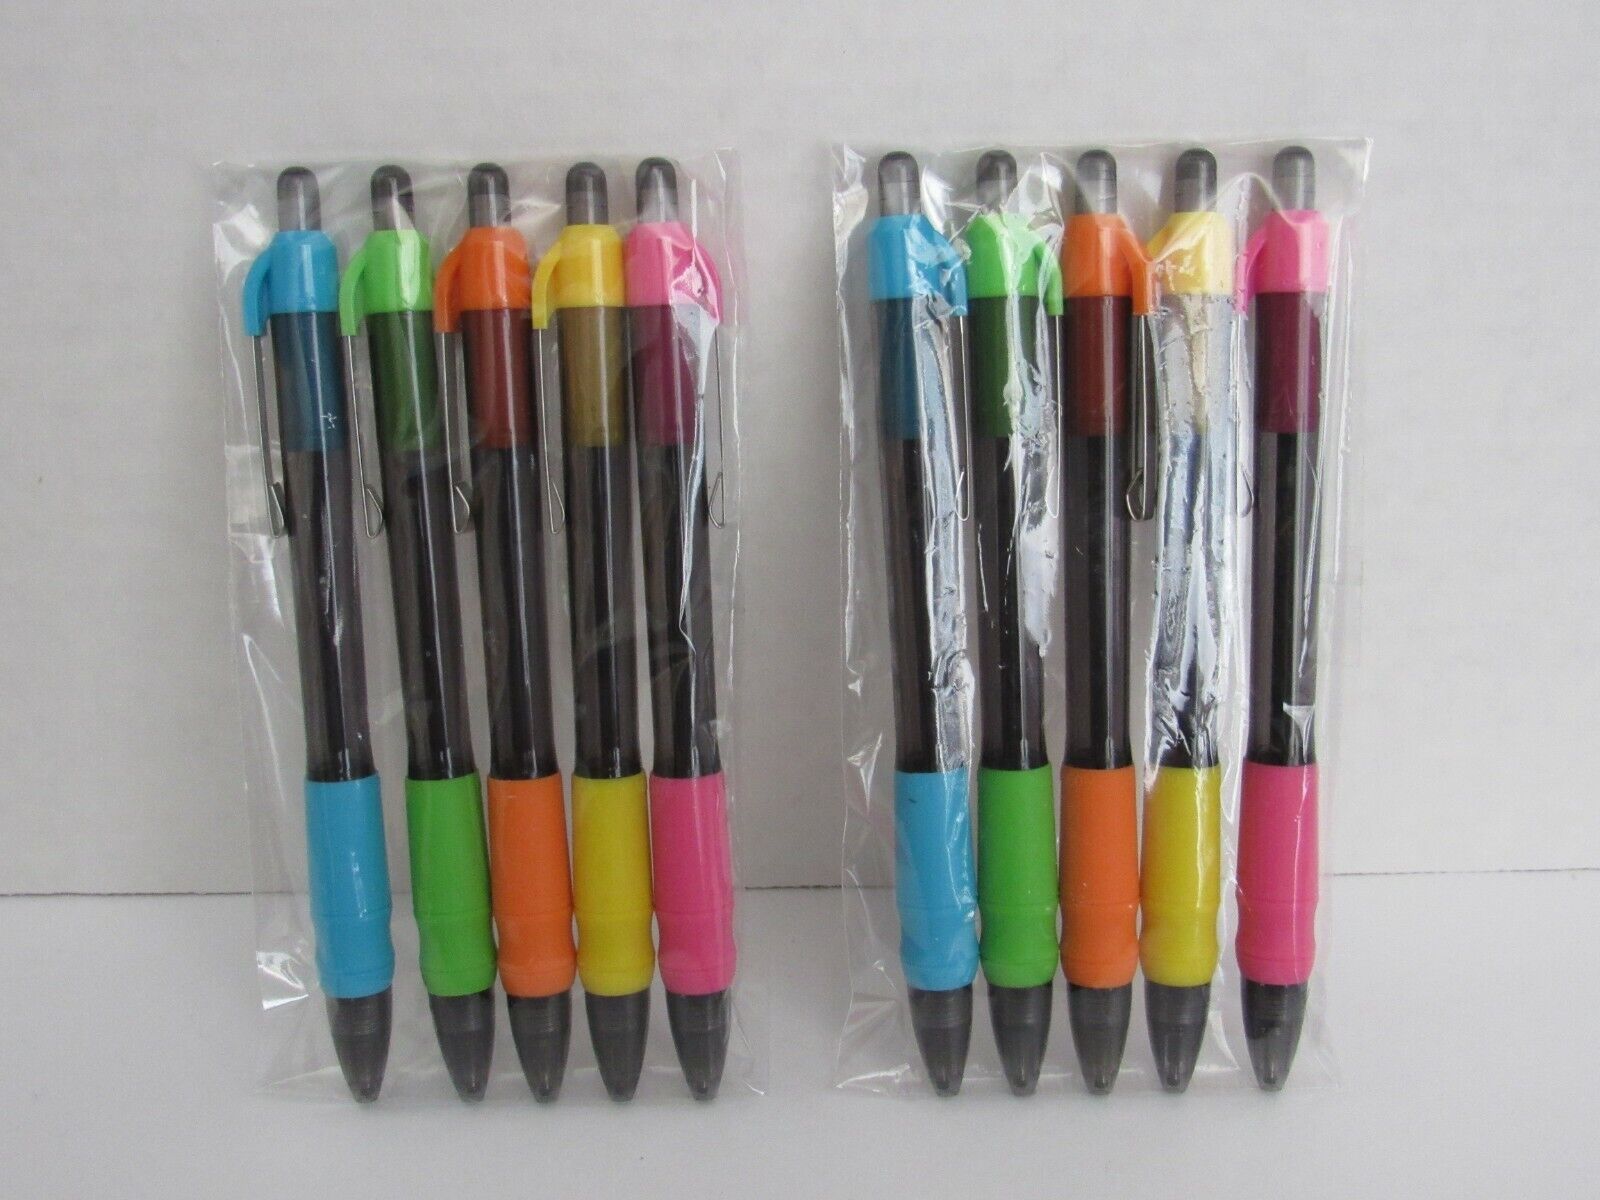 2x PACK OF 5=10 MAX GLIDE TROPICAL COLORS GEL BALLPOINT PENS-SPECIAL DEAL OFFER